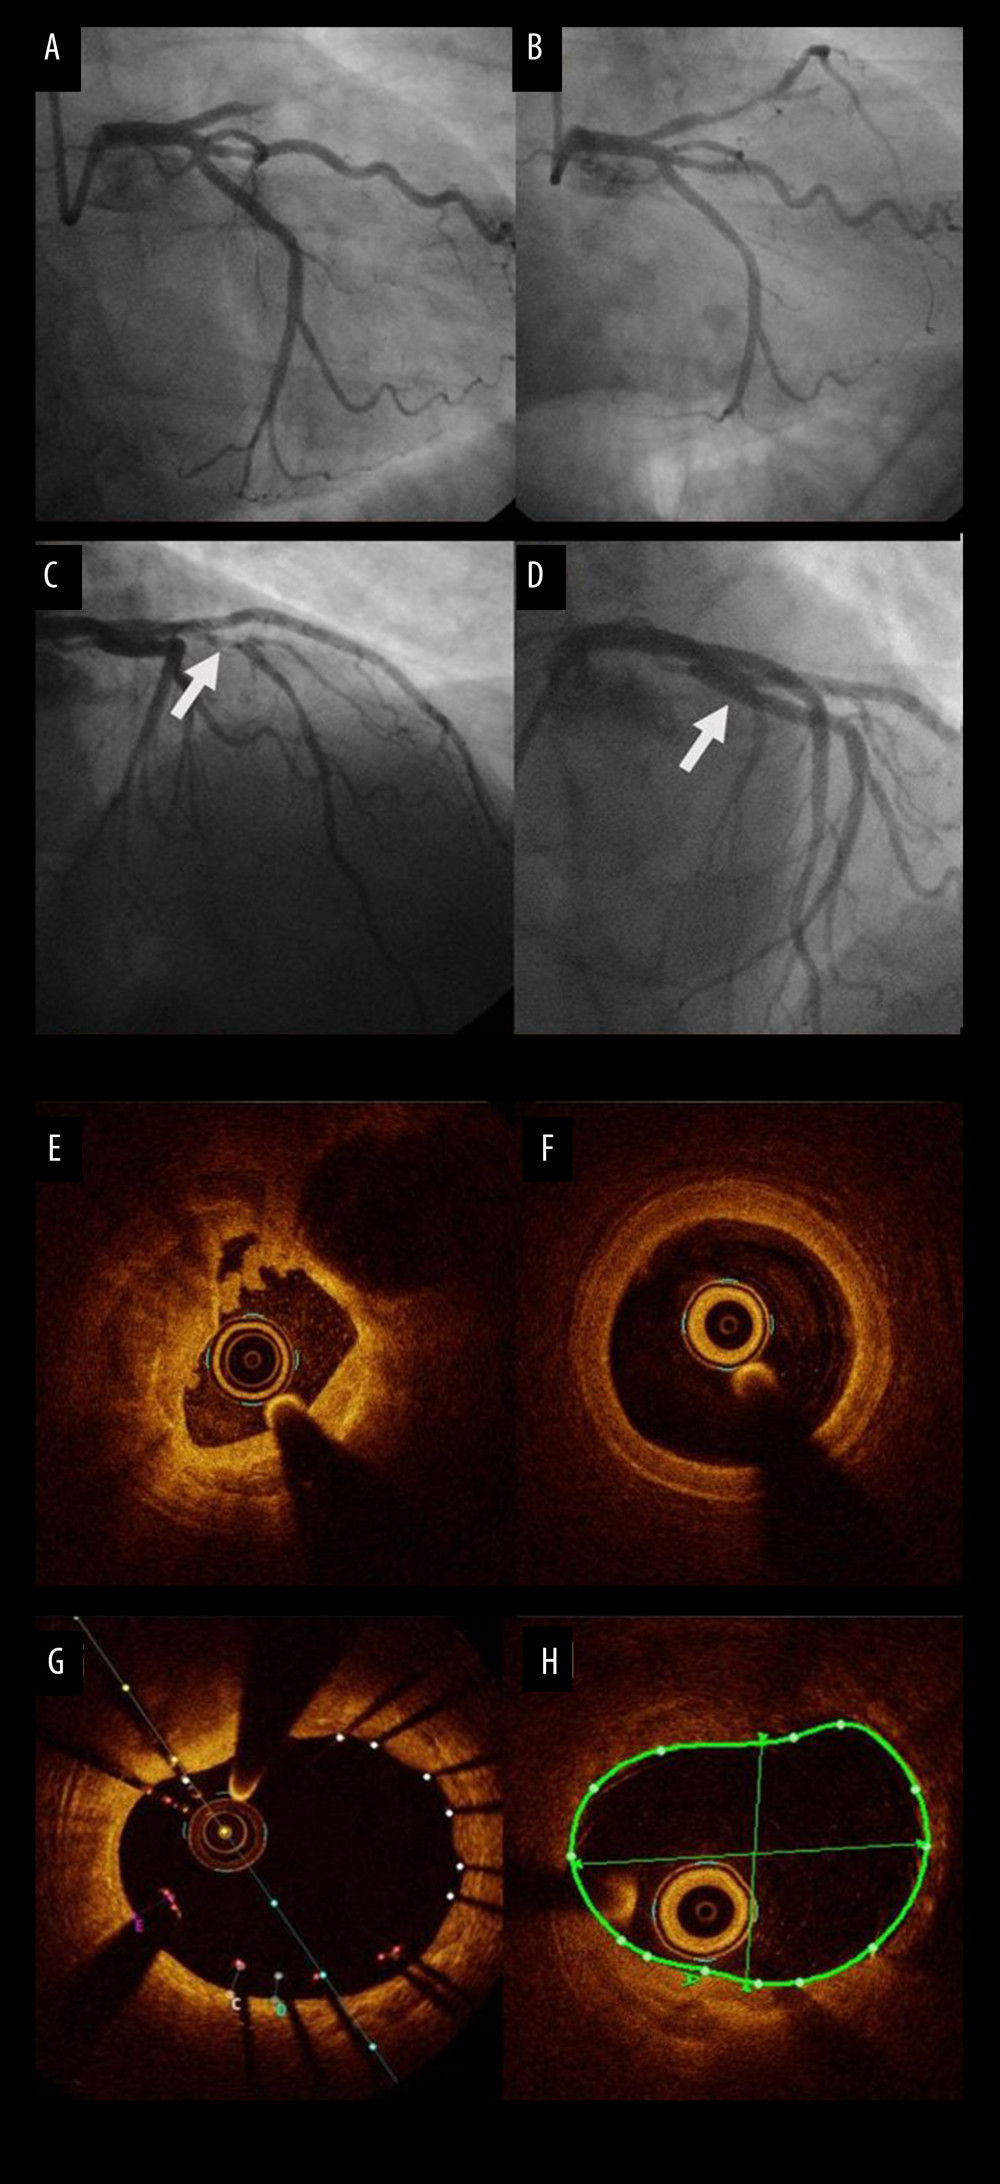 A 58-year-old woman presented with acute anterior wall ST elevation myocardial infarction. (A) the left coronary angiogram showed the culprit lesion thrombotic occlusion at proximal left anterior descending artery (LAD), with a right anterior oblique caudal view. (B) The left coronary angiogram after thrombus suction. (C) The arrow shows the culprit site after thrombus suction, with a right anterior oblique cranial view. (D) The arrow shows the result after drug-eluting stent (DES) and optical computed tomography (OCT)-guided percutaneous coronary intervention (PCI). (E) OCT finding at the culprit site, with much thrombus and minimal luminal area (MLA) only 1.9 mm2 after thrombus suction. (F) OCT finding at the LAD reference site, with MLA 4.7 mm2. (G) OCT finding at the culprit site after DES implantation. (H) OCT finding at the LAD reference site.